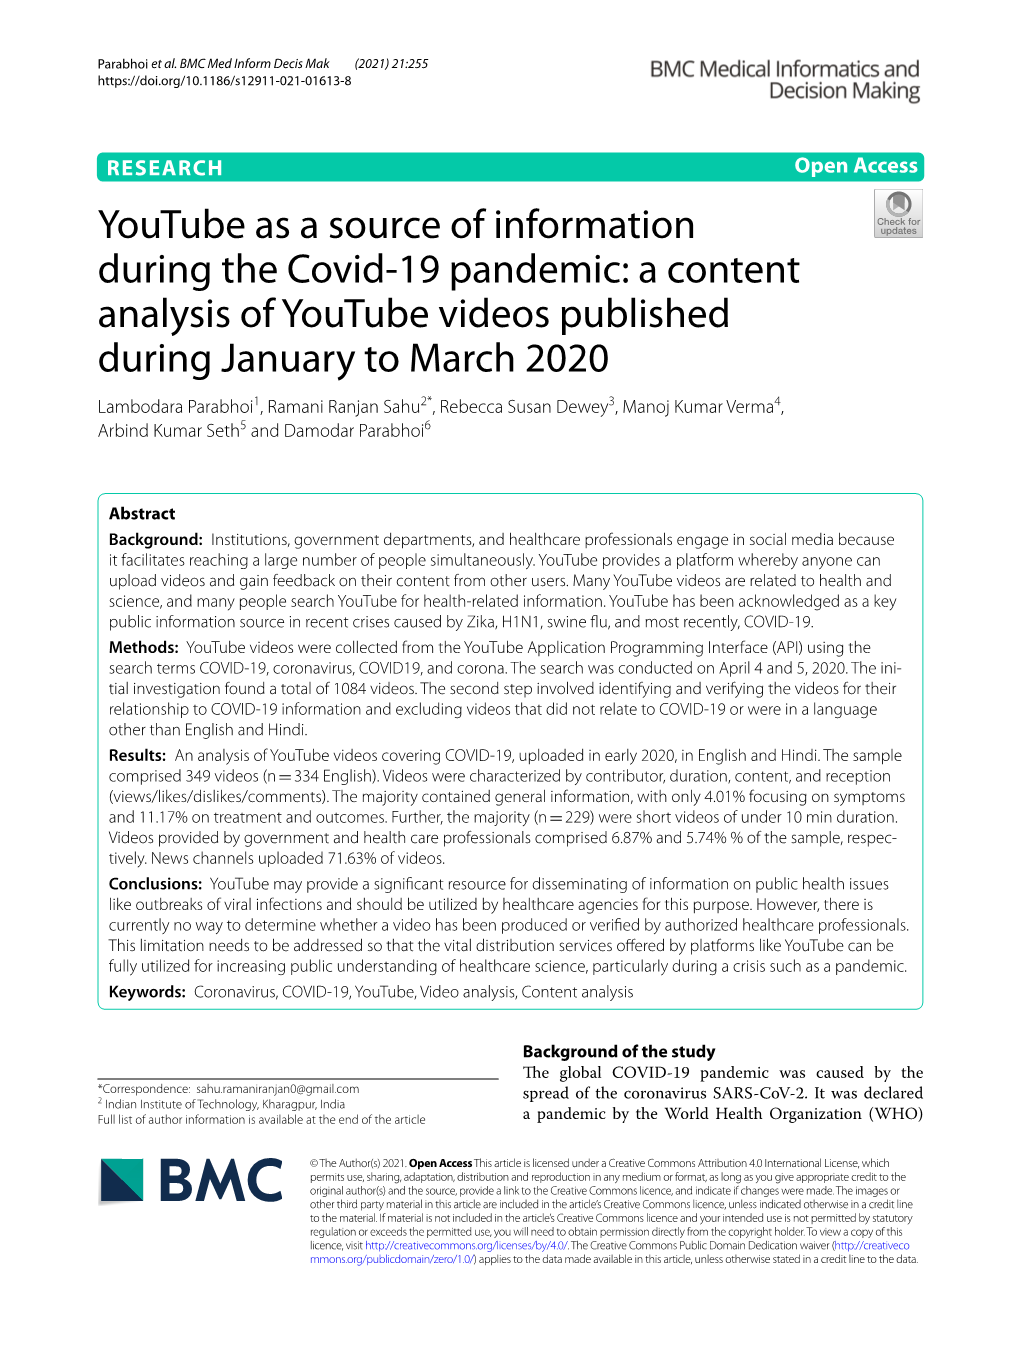 Youtube As a Source of Information During the Covid-19 Pandemic